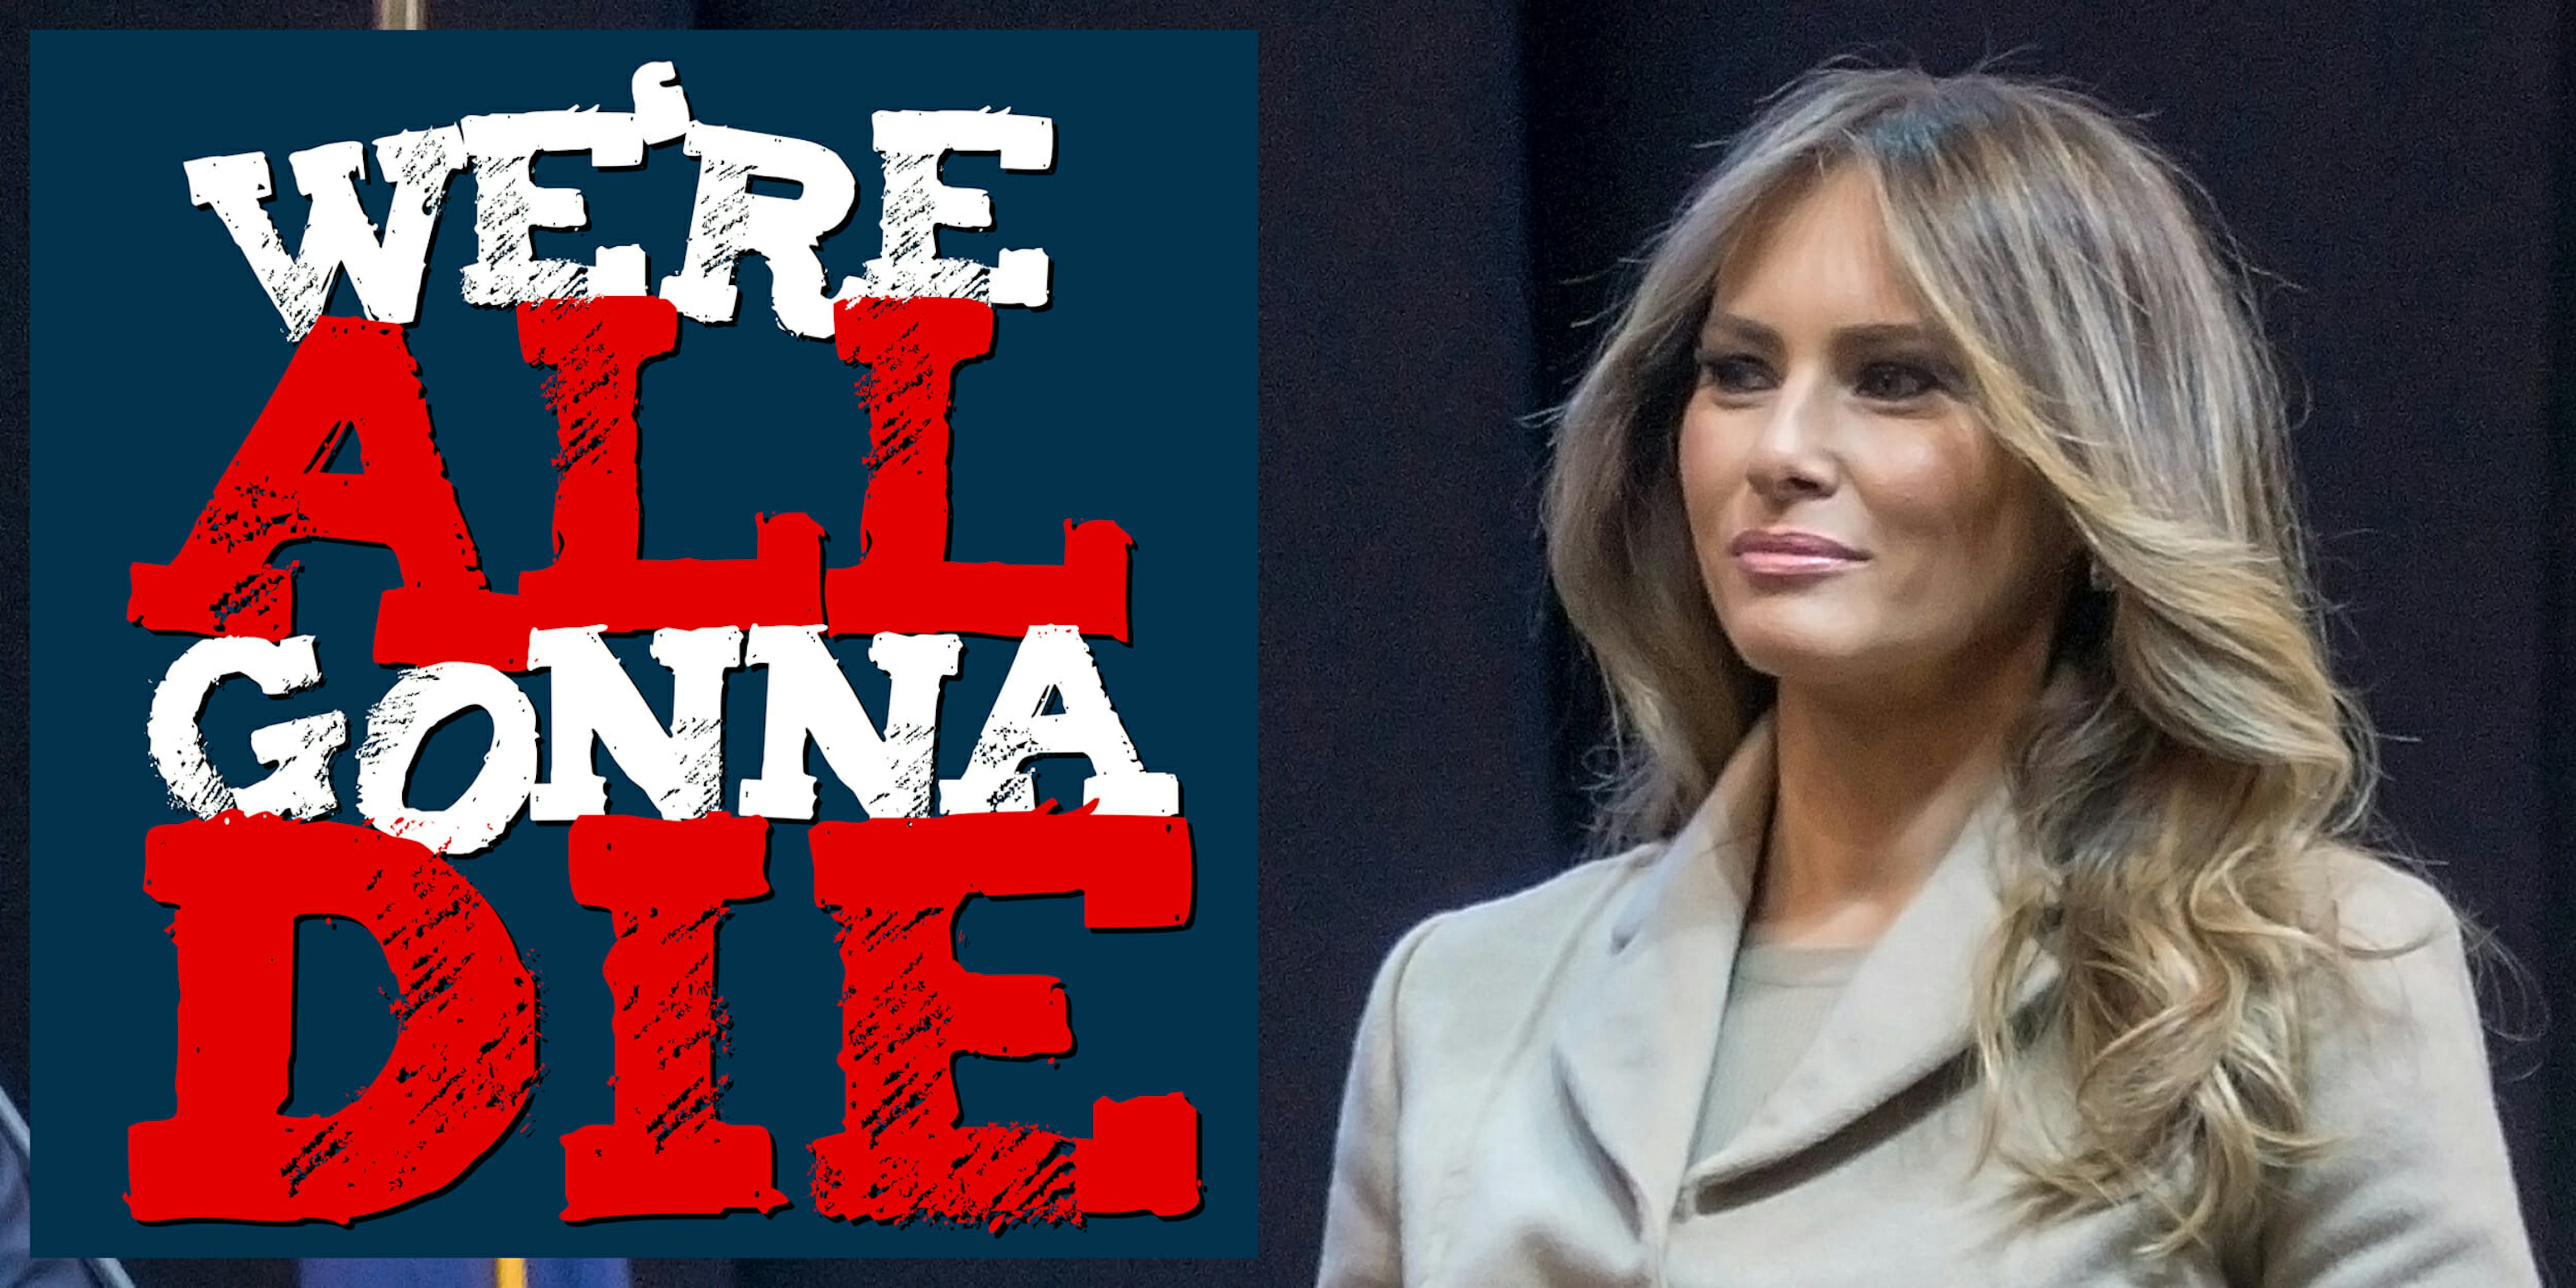 We're All Gonna Die podcast discusses melania trump